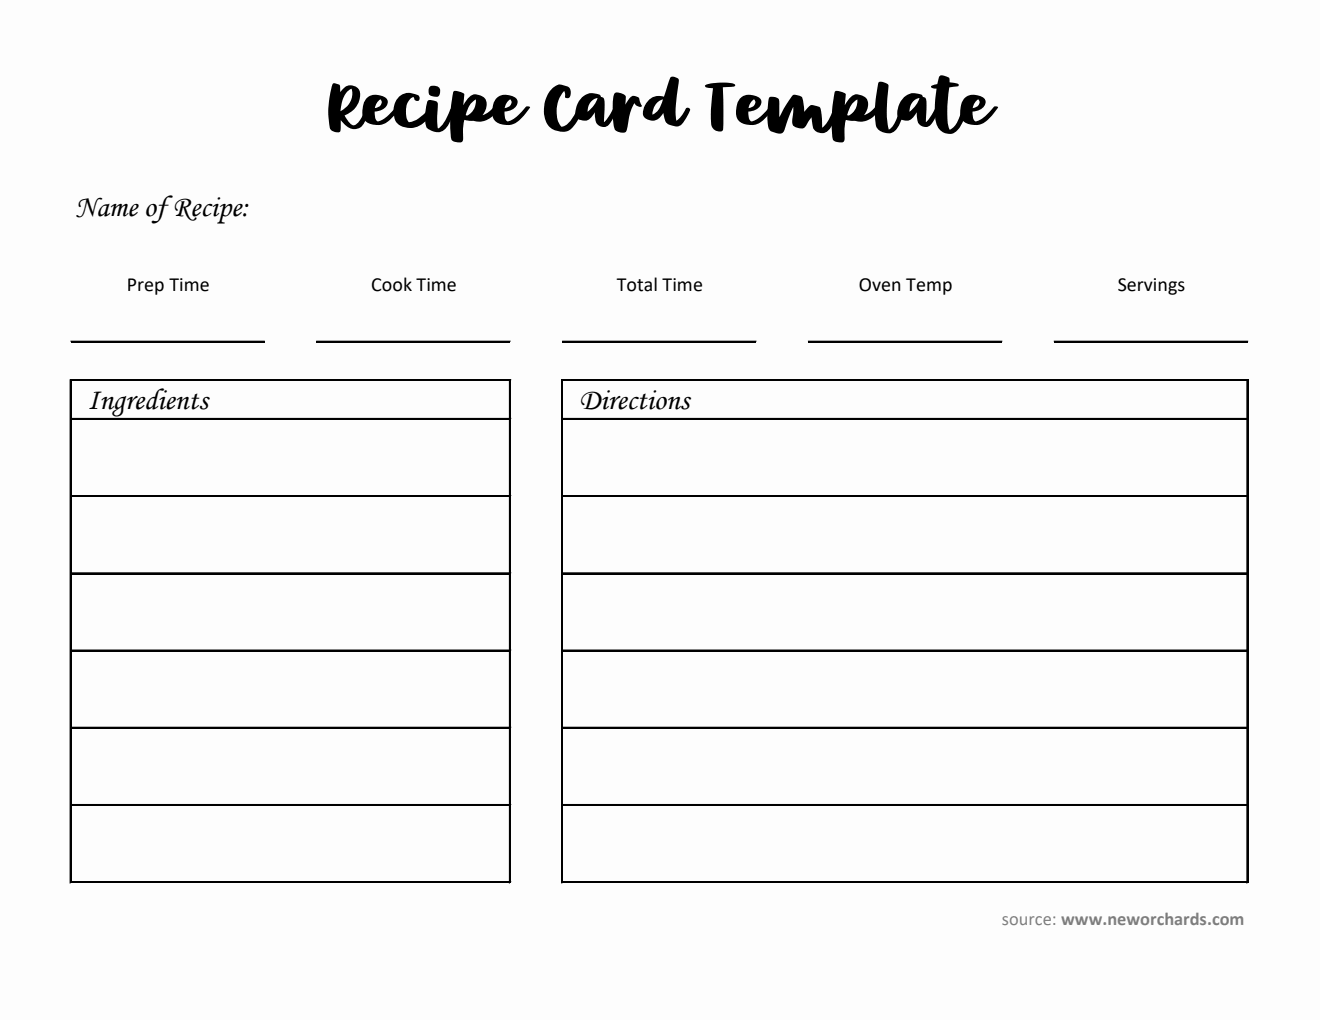 Free Recipe Card Template in Excel Format